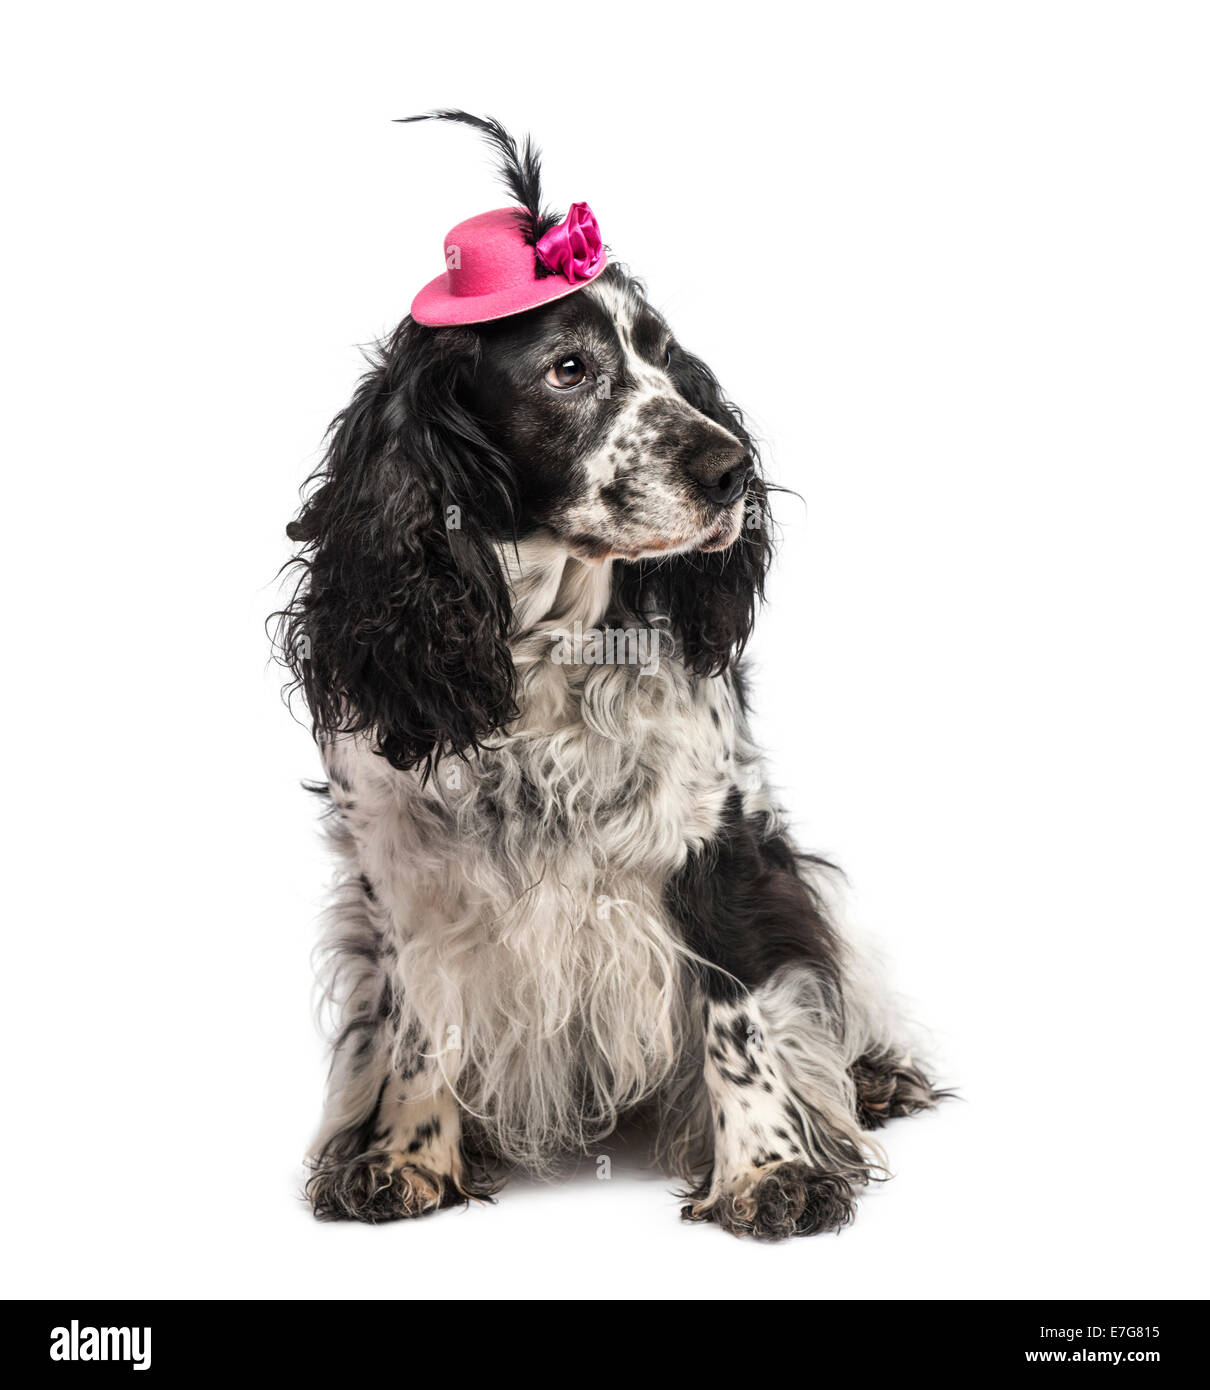 English Springer Spaniel wearing a hat against white background Stock Photo